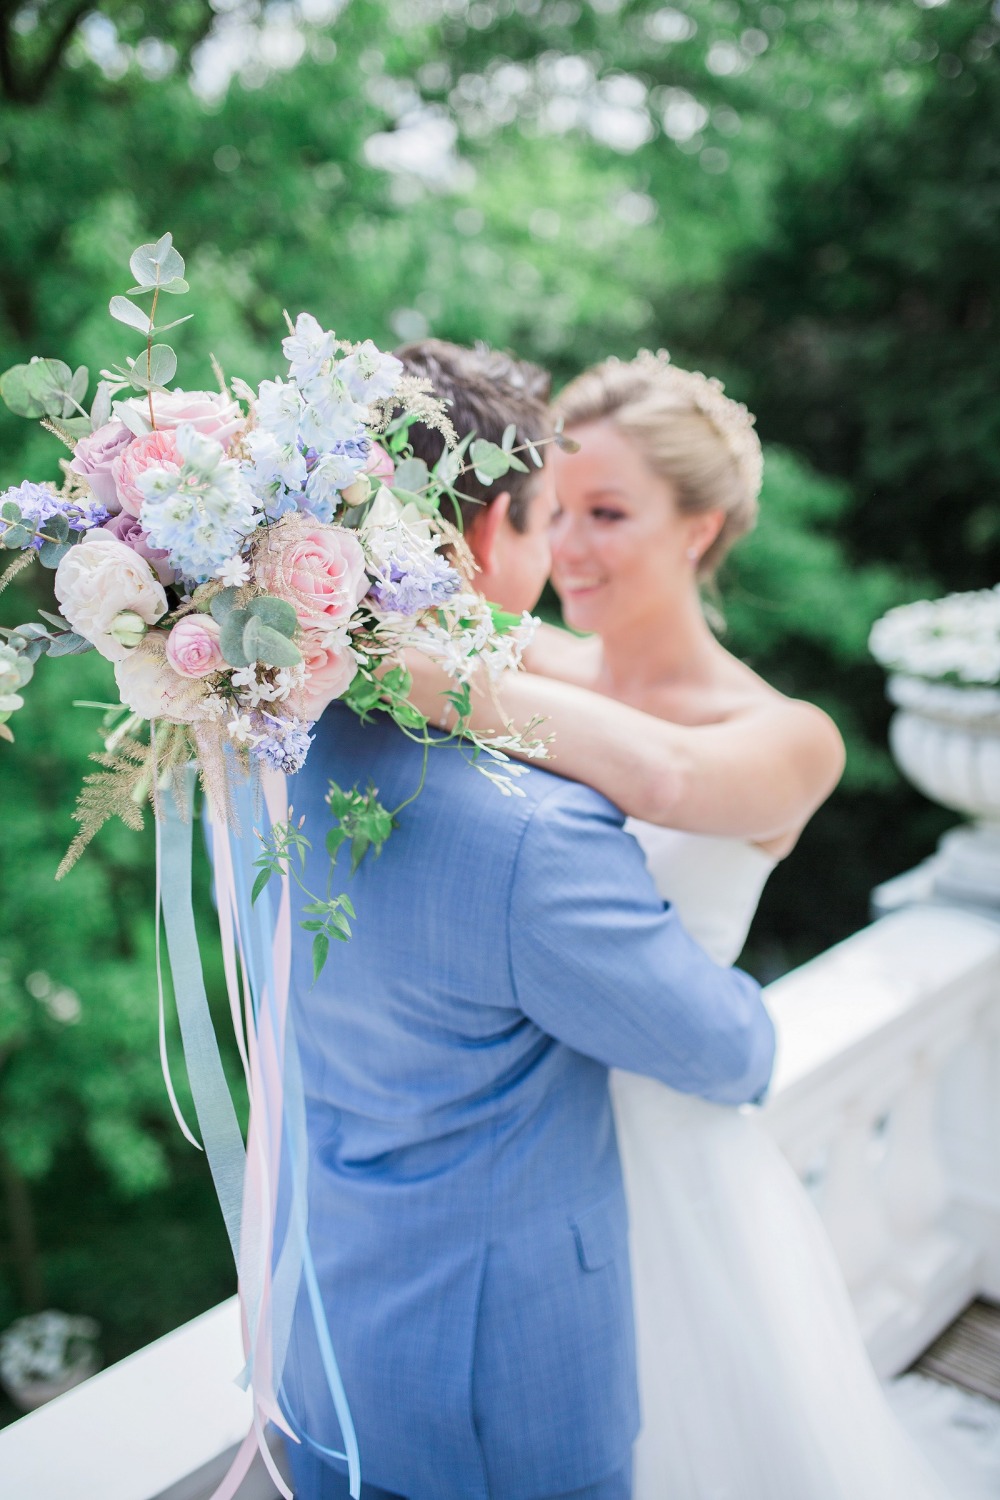 Soft pink and blue wedding bouquet